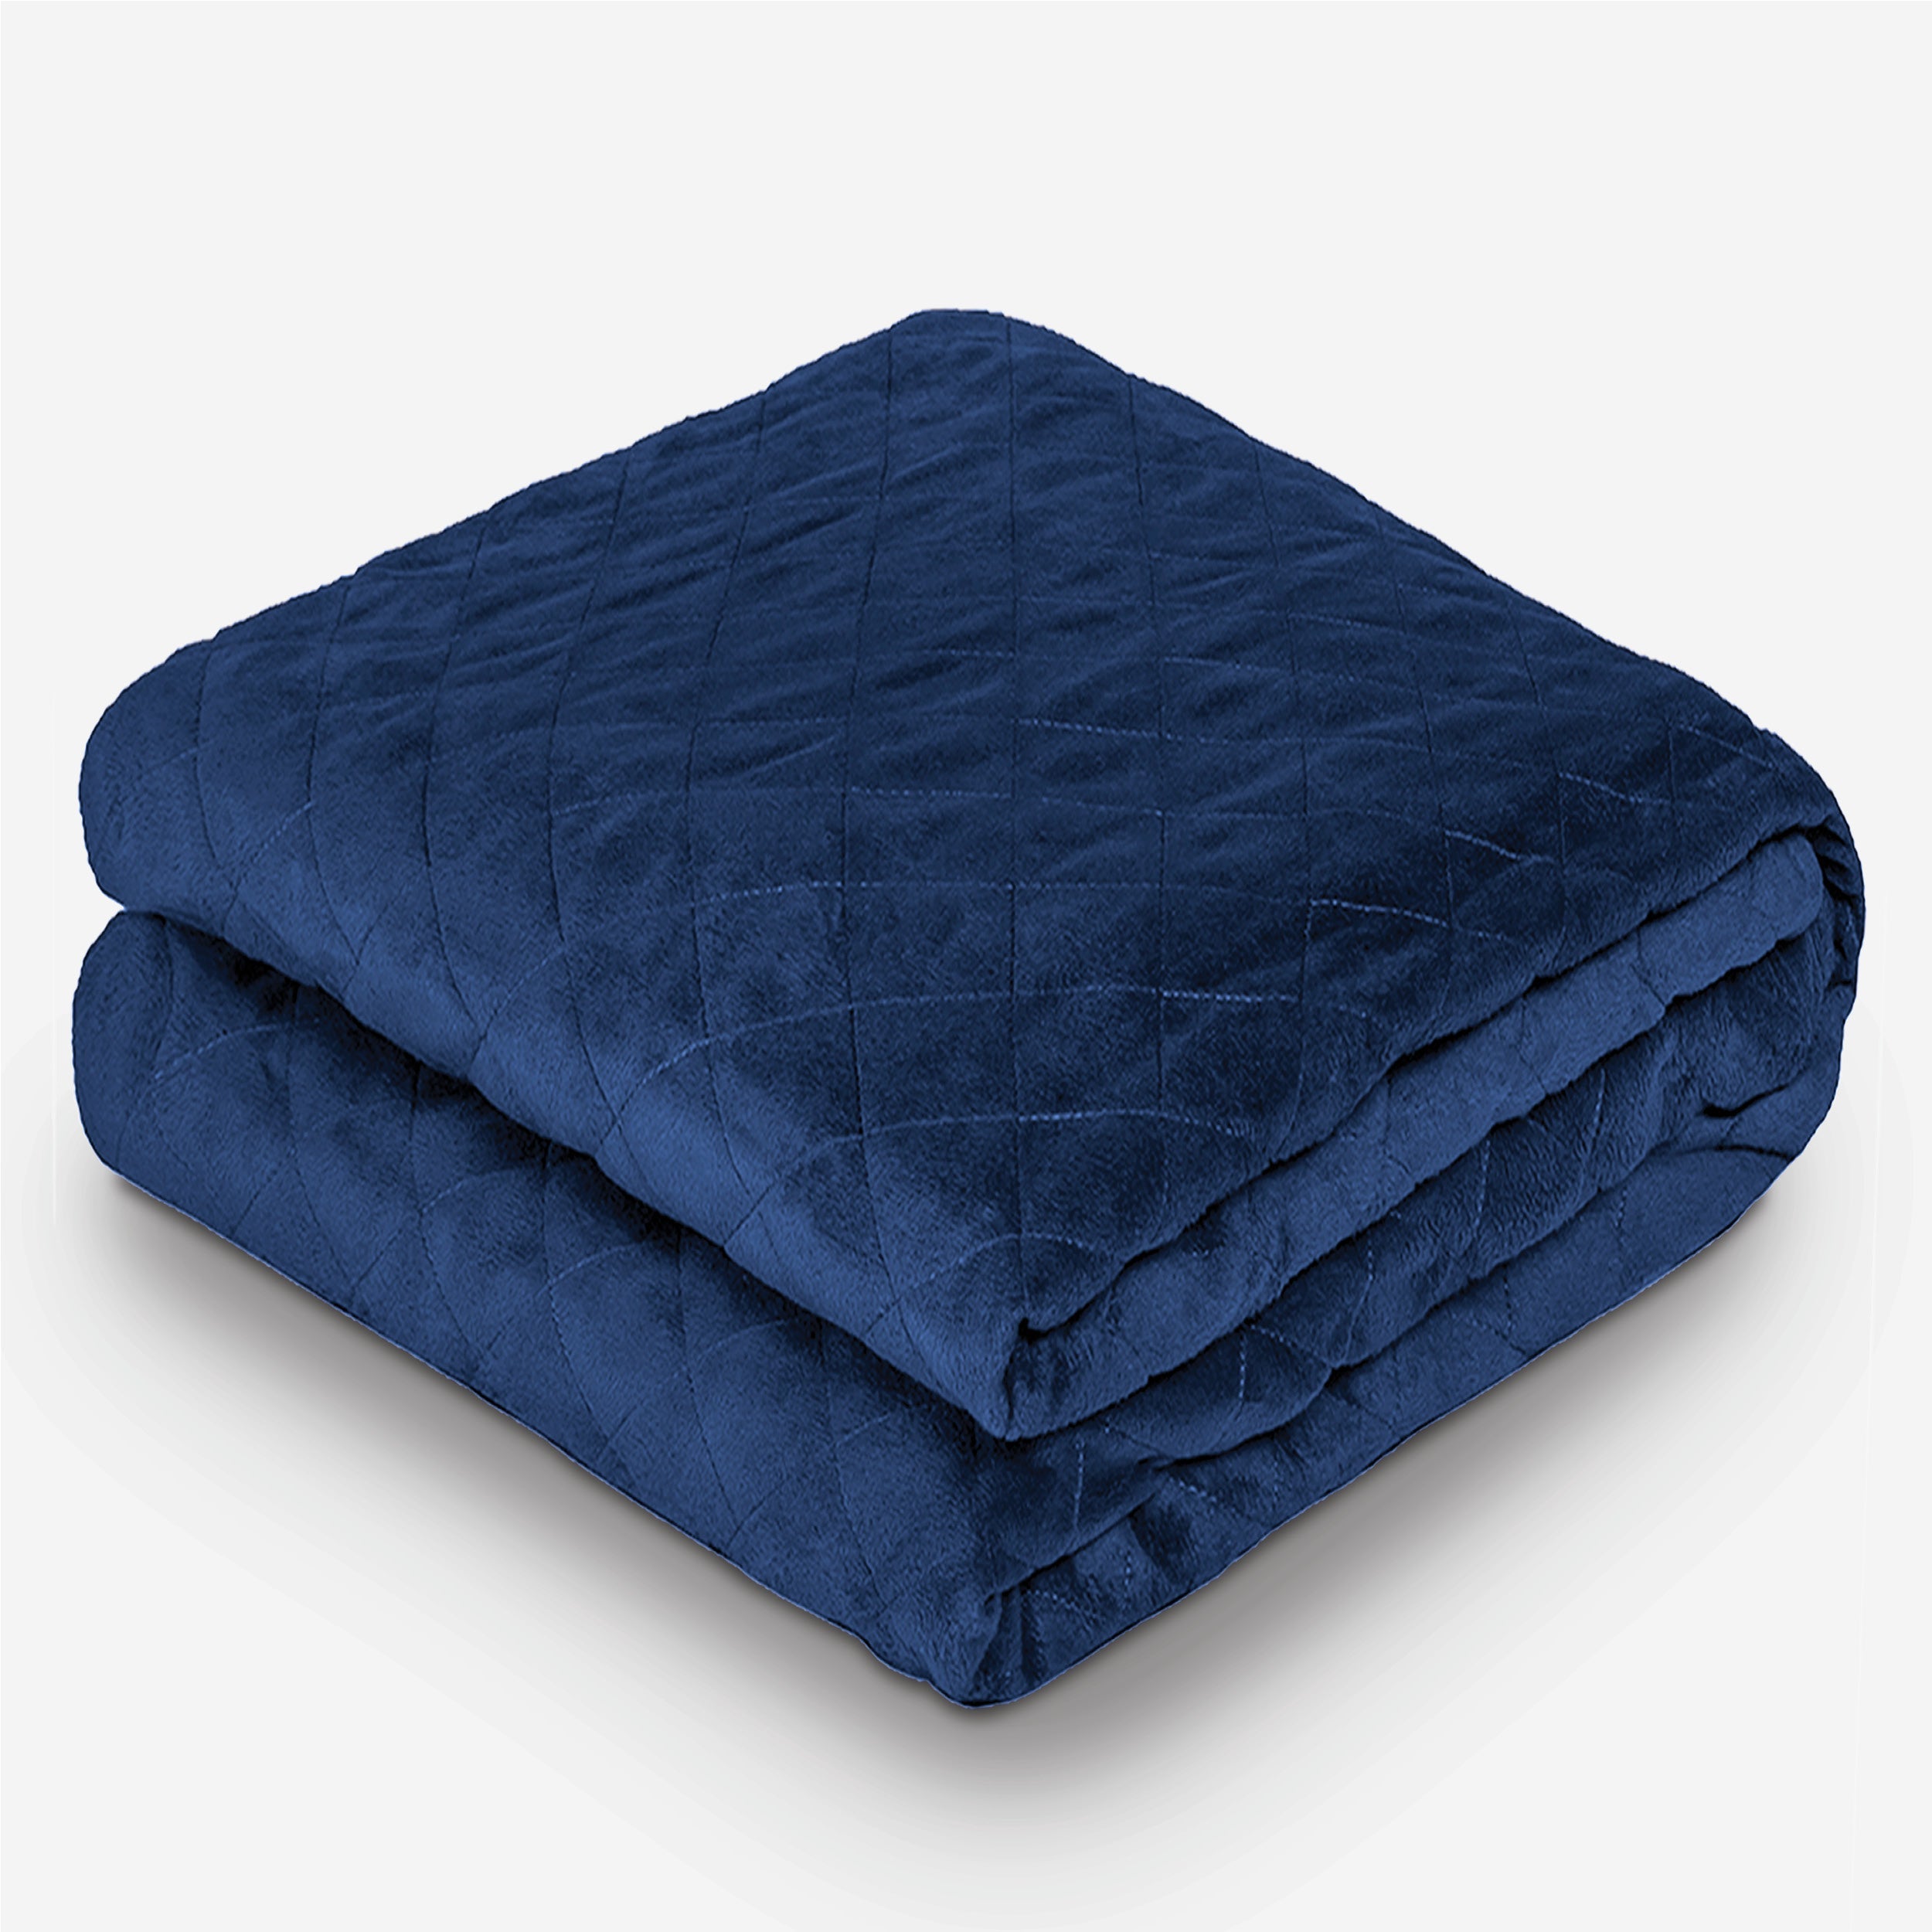 Wb Minkyduvetcover Darkblue Categoryimage 92F38256 2562 4Bc1 Bcf9 8F688B346Dff from Bare Home.